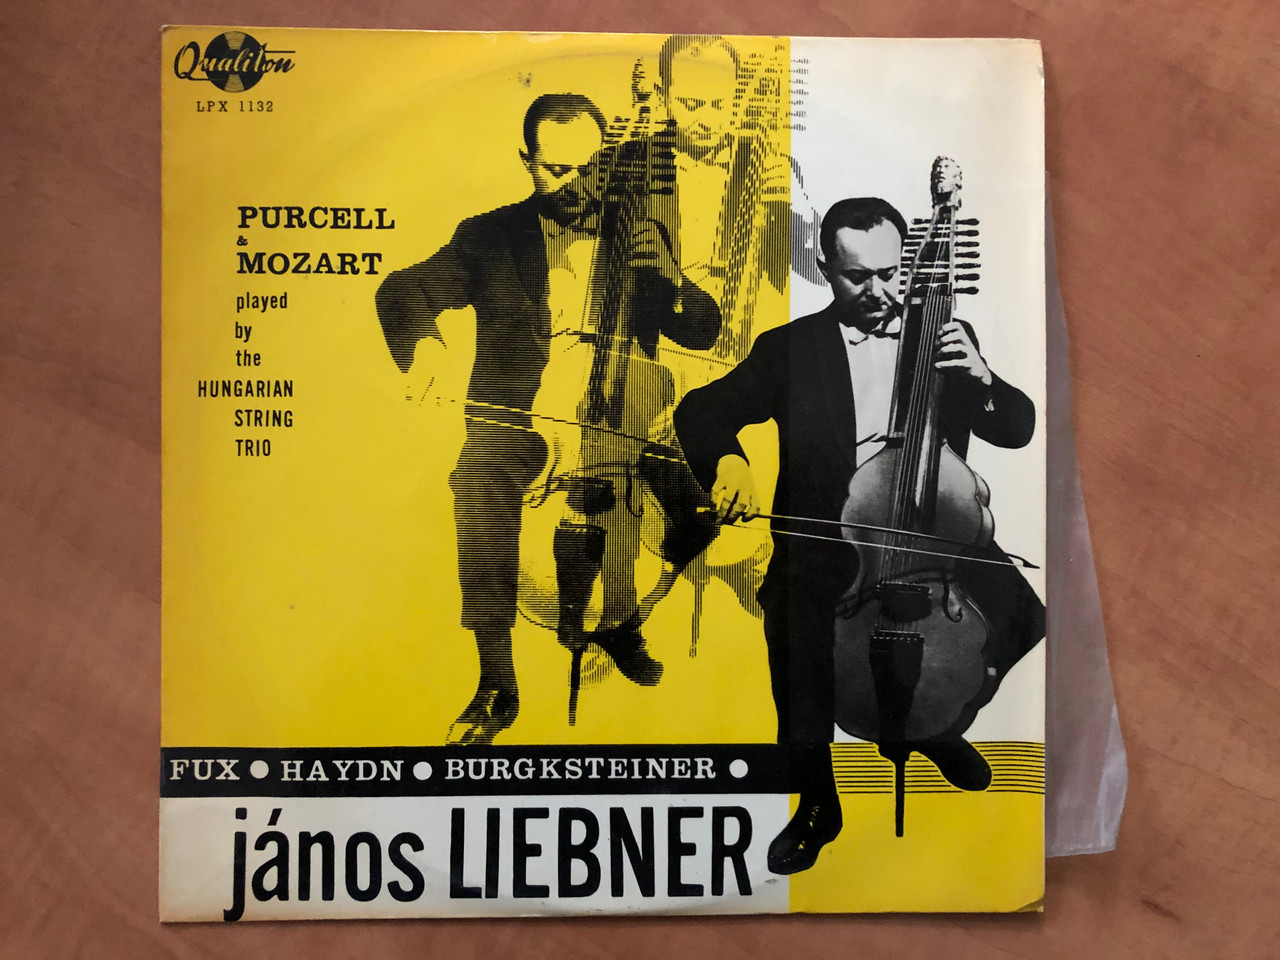 https://cdn10.bigcommerce.com/s-62bdpkt7pb/products/30663/images/181129/Purcell_Mozart_Played_By_The_Hungarian_String_Trio_Fux_Haydn_Burgksteiner_Jnos_Liebner_Qualiton_LP_LPX_1132_1__71500.1623433610.1280.1280.JPG?c=2&_ga=2.174365538.1350781157.1623785574-869033857.1623785574